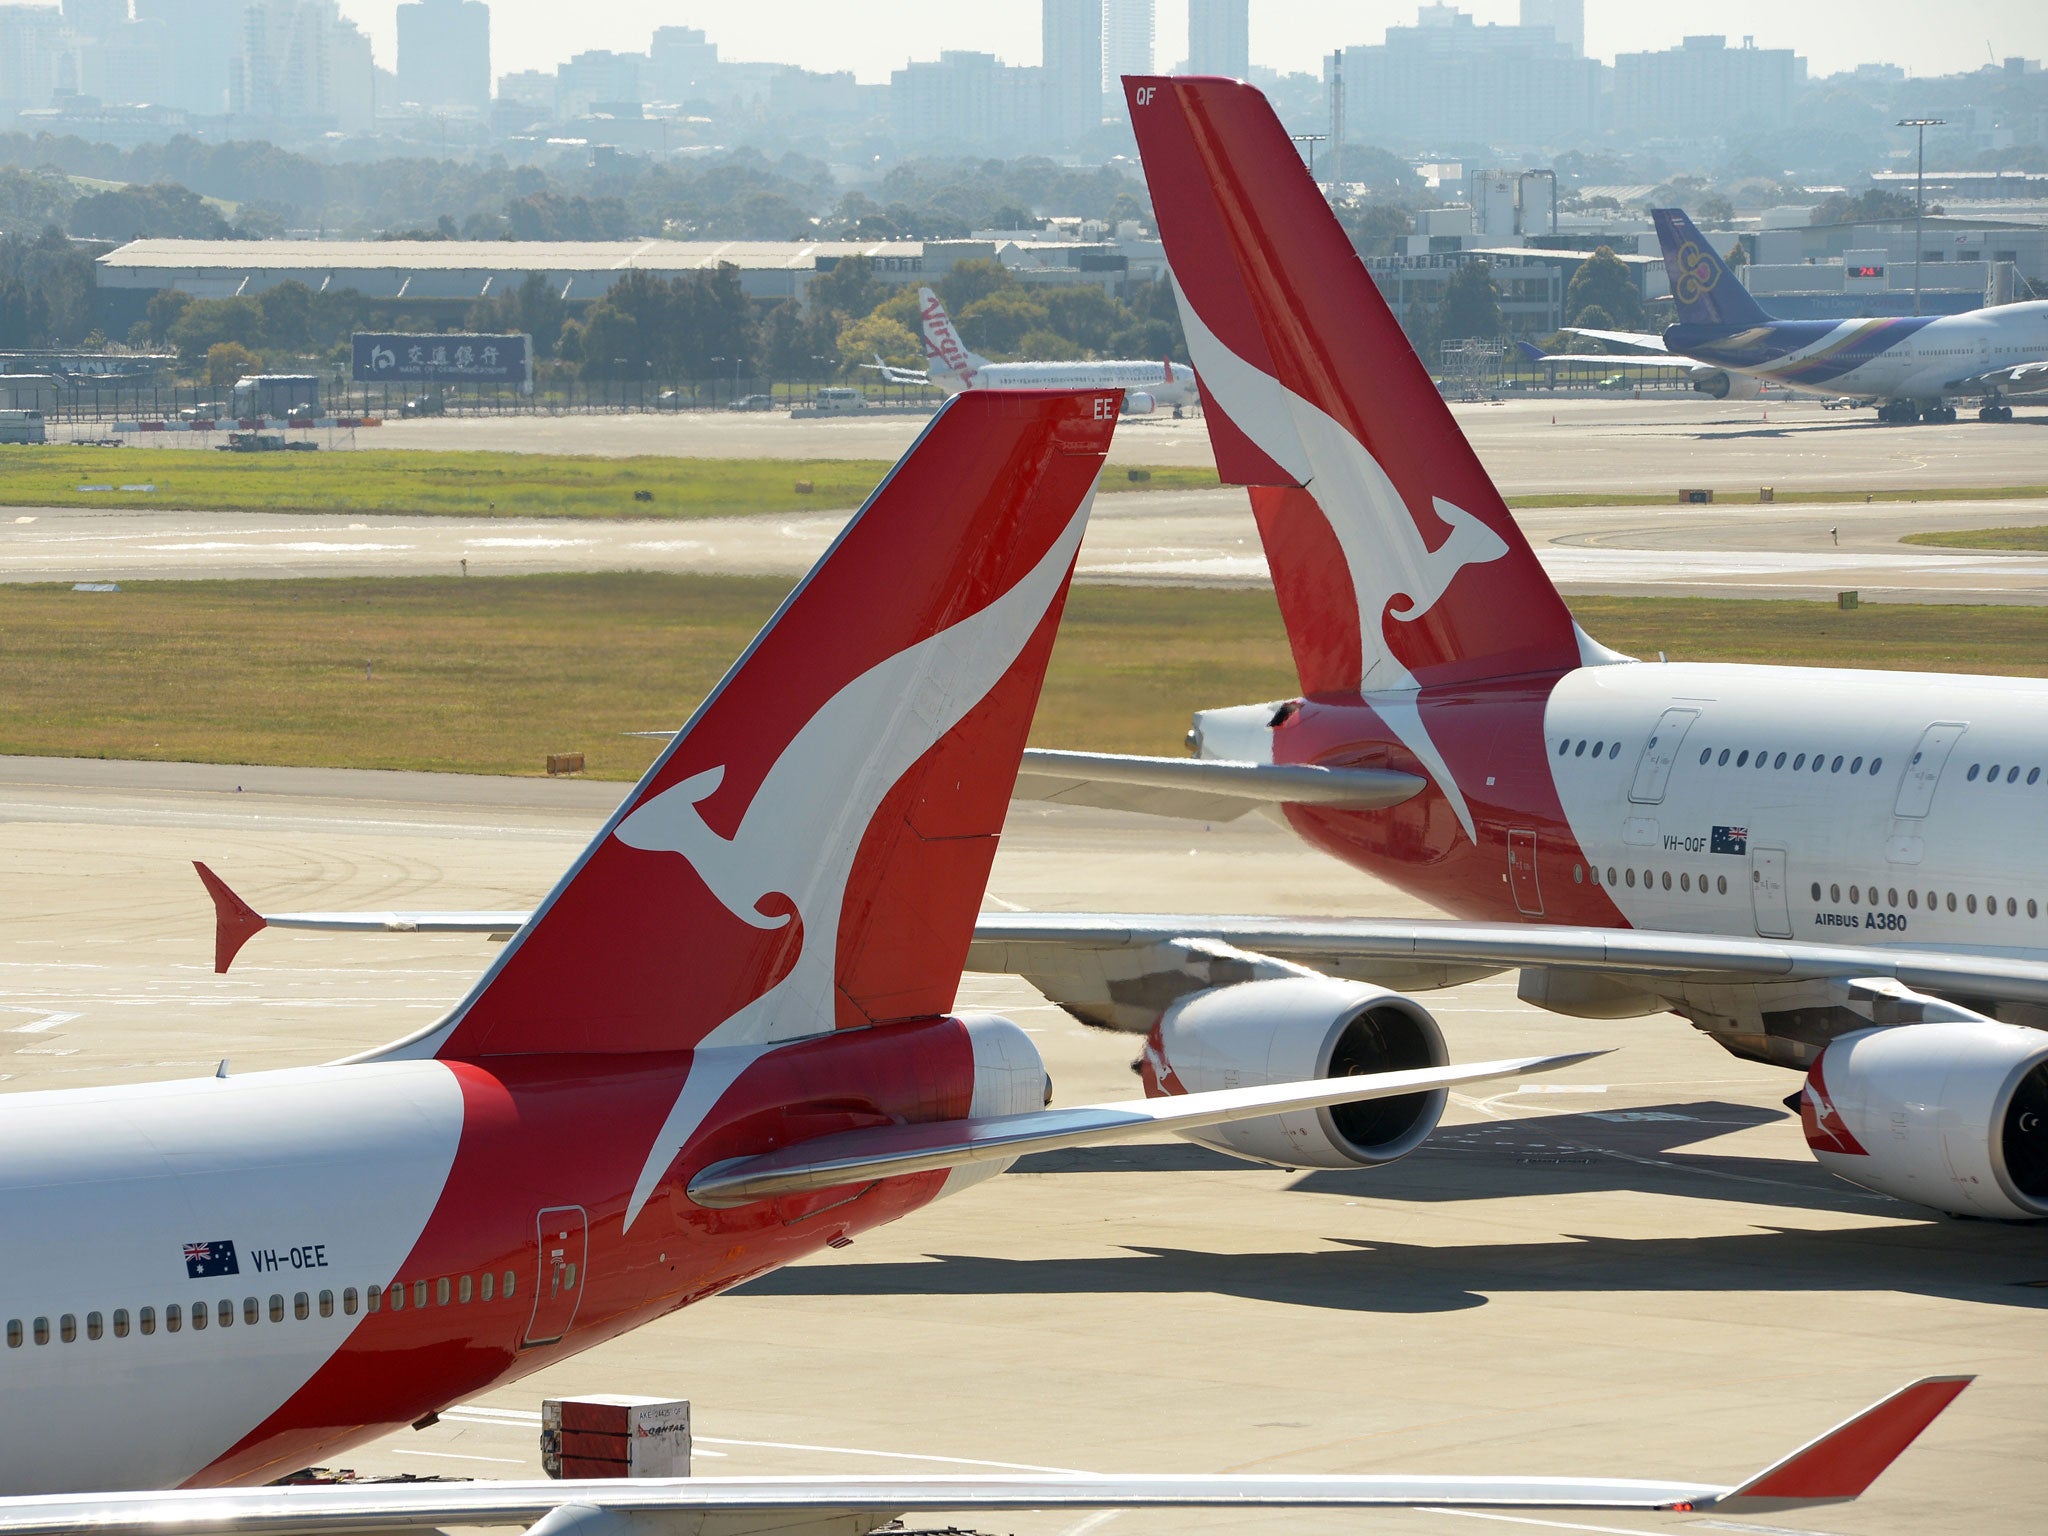 Qantas' business class costs £4,200 from NSW to Texas (AFP/Getty)